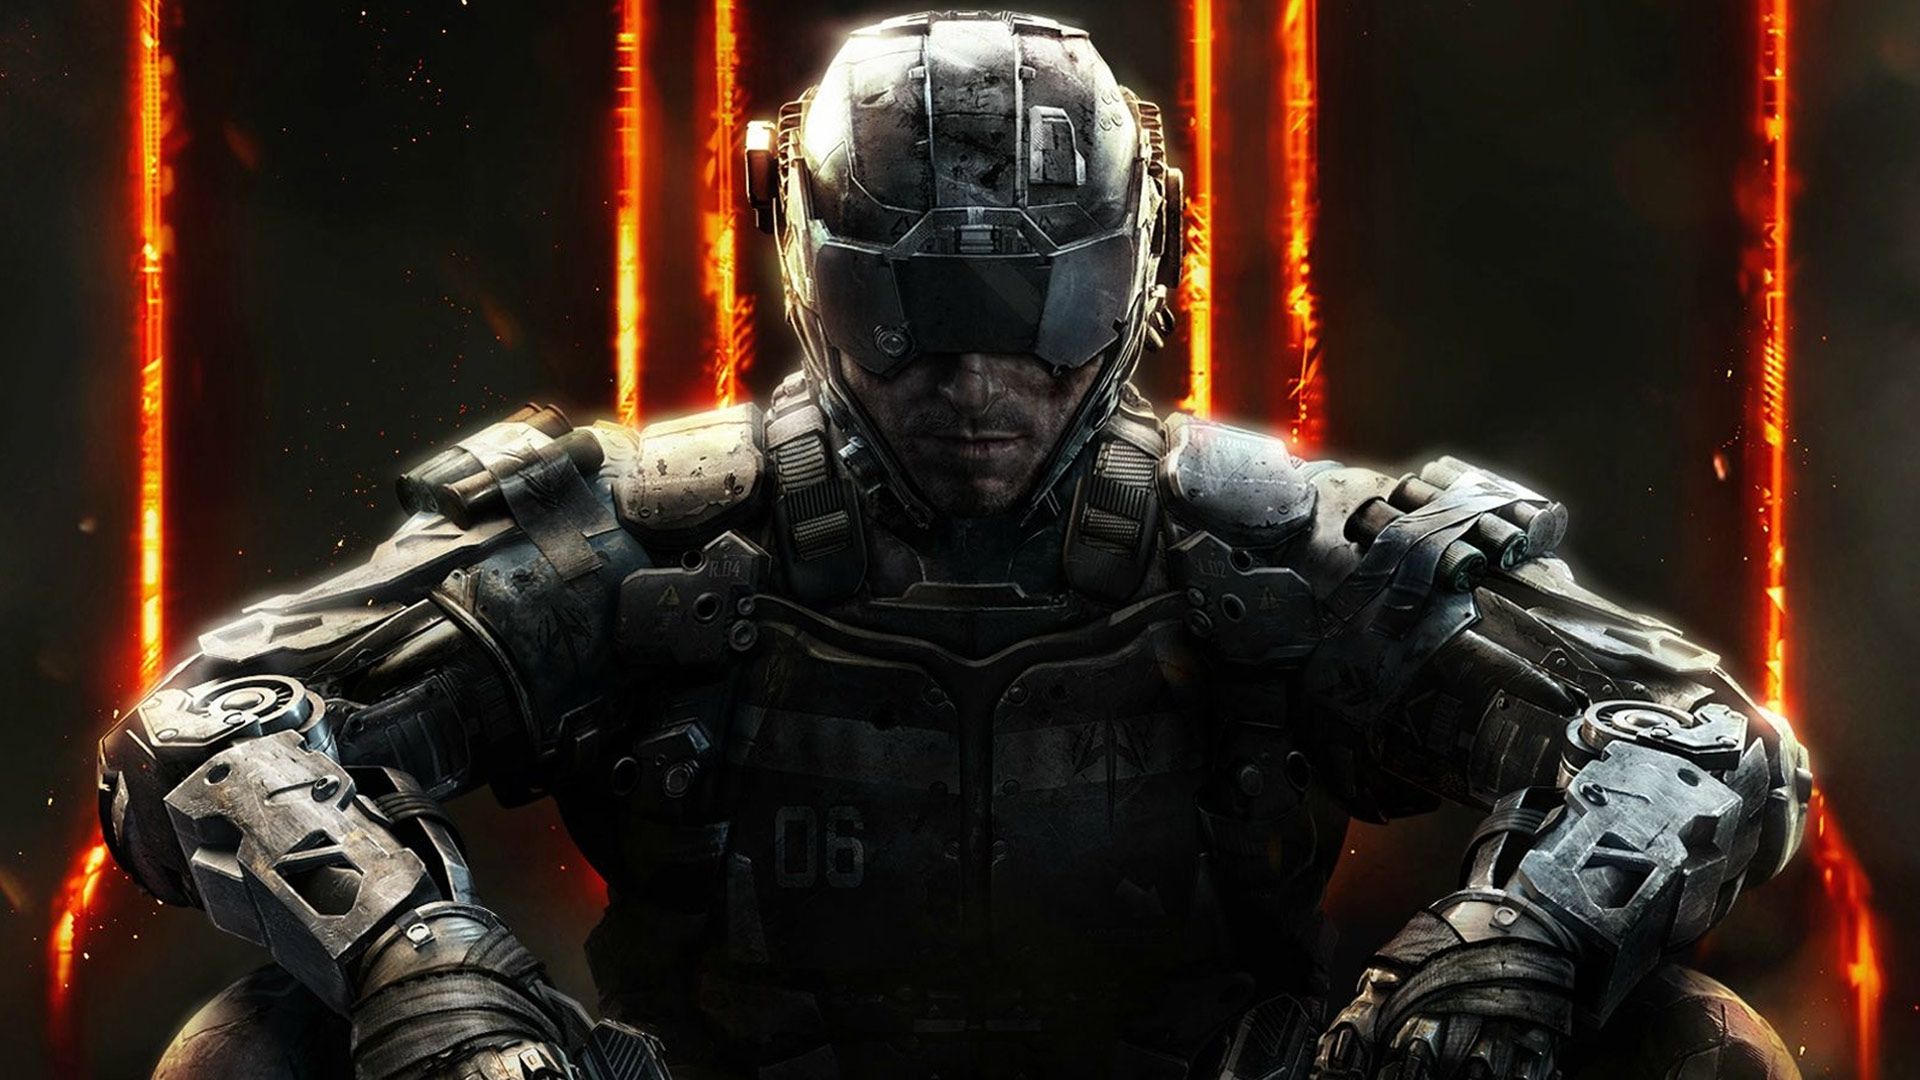 Call of duty black ops 3 wallpapers Free full hd wallpapers for